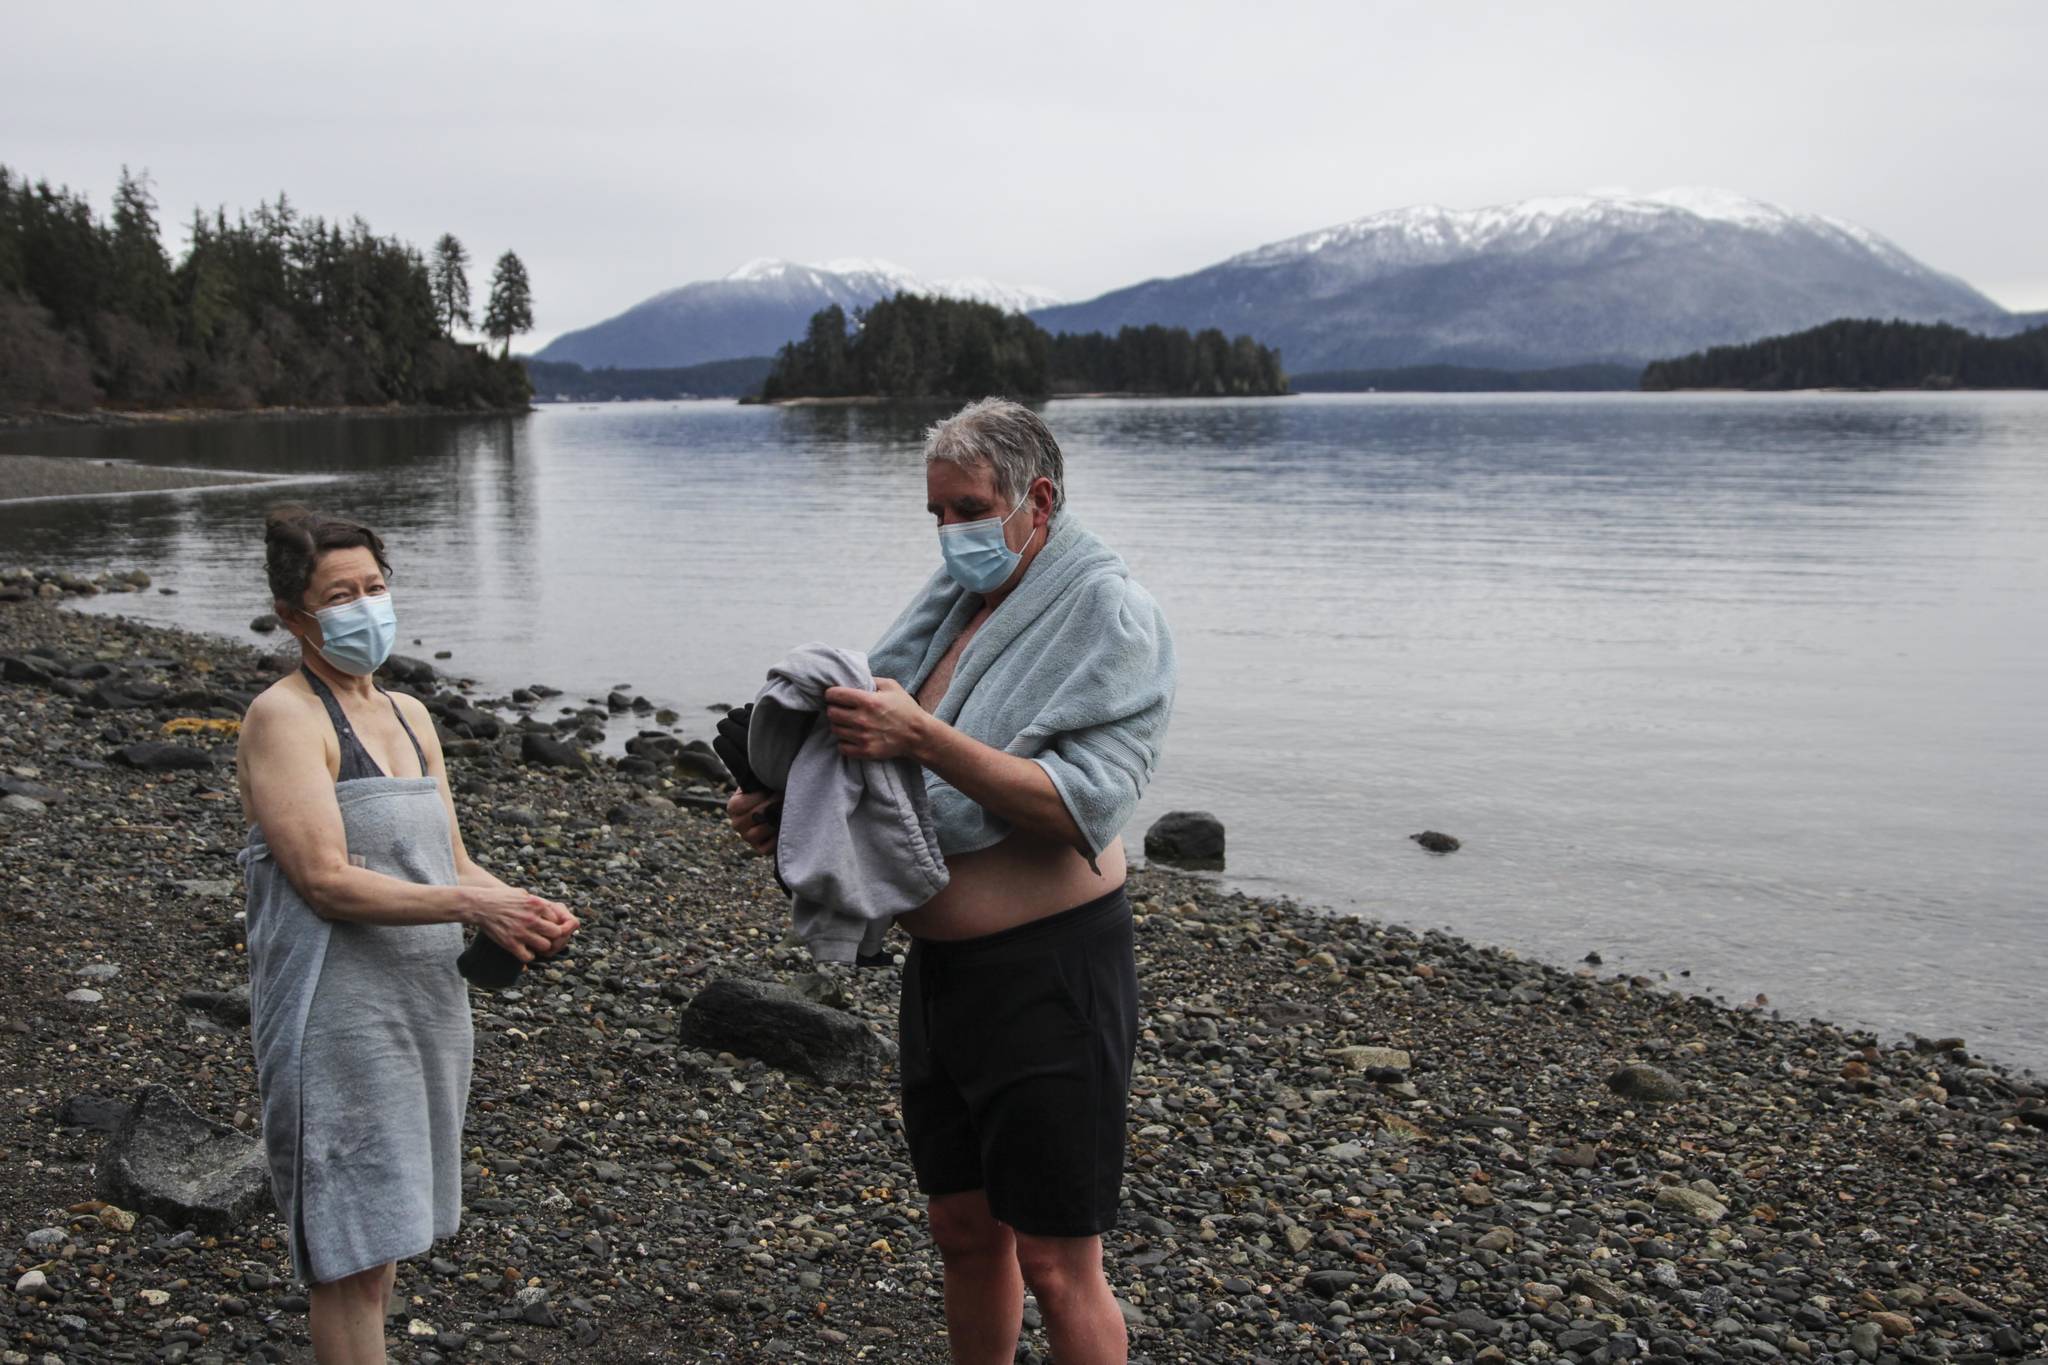 Sherri McDonald and Reid Tippets dry off after their annual dip in the water at Auke Recreation Picnic Area on New Years Day, Jan. 1, 2021. Tippets said he’d done the dip for 11 years in a row. The Polar Bear Dip, held for 30 years at Auke Rec, was canceled this year over pandemic concerns, but some individual households opted to make the dip with their families, with masks, distancing, and care very much in evidence, while other pods had fires or walked dogs next to the cold ocean. (Michael S. Lockett / Juneau Empire)